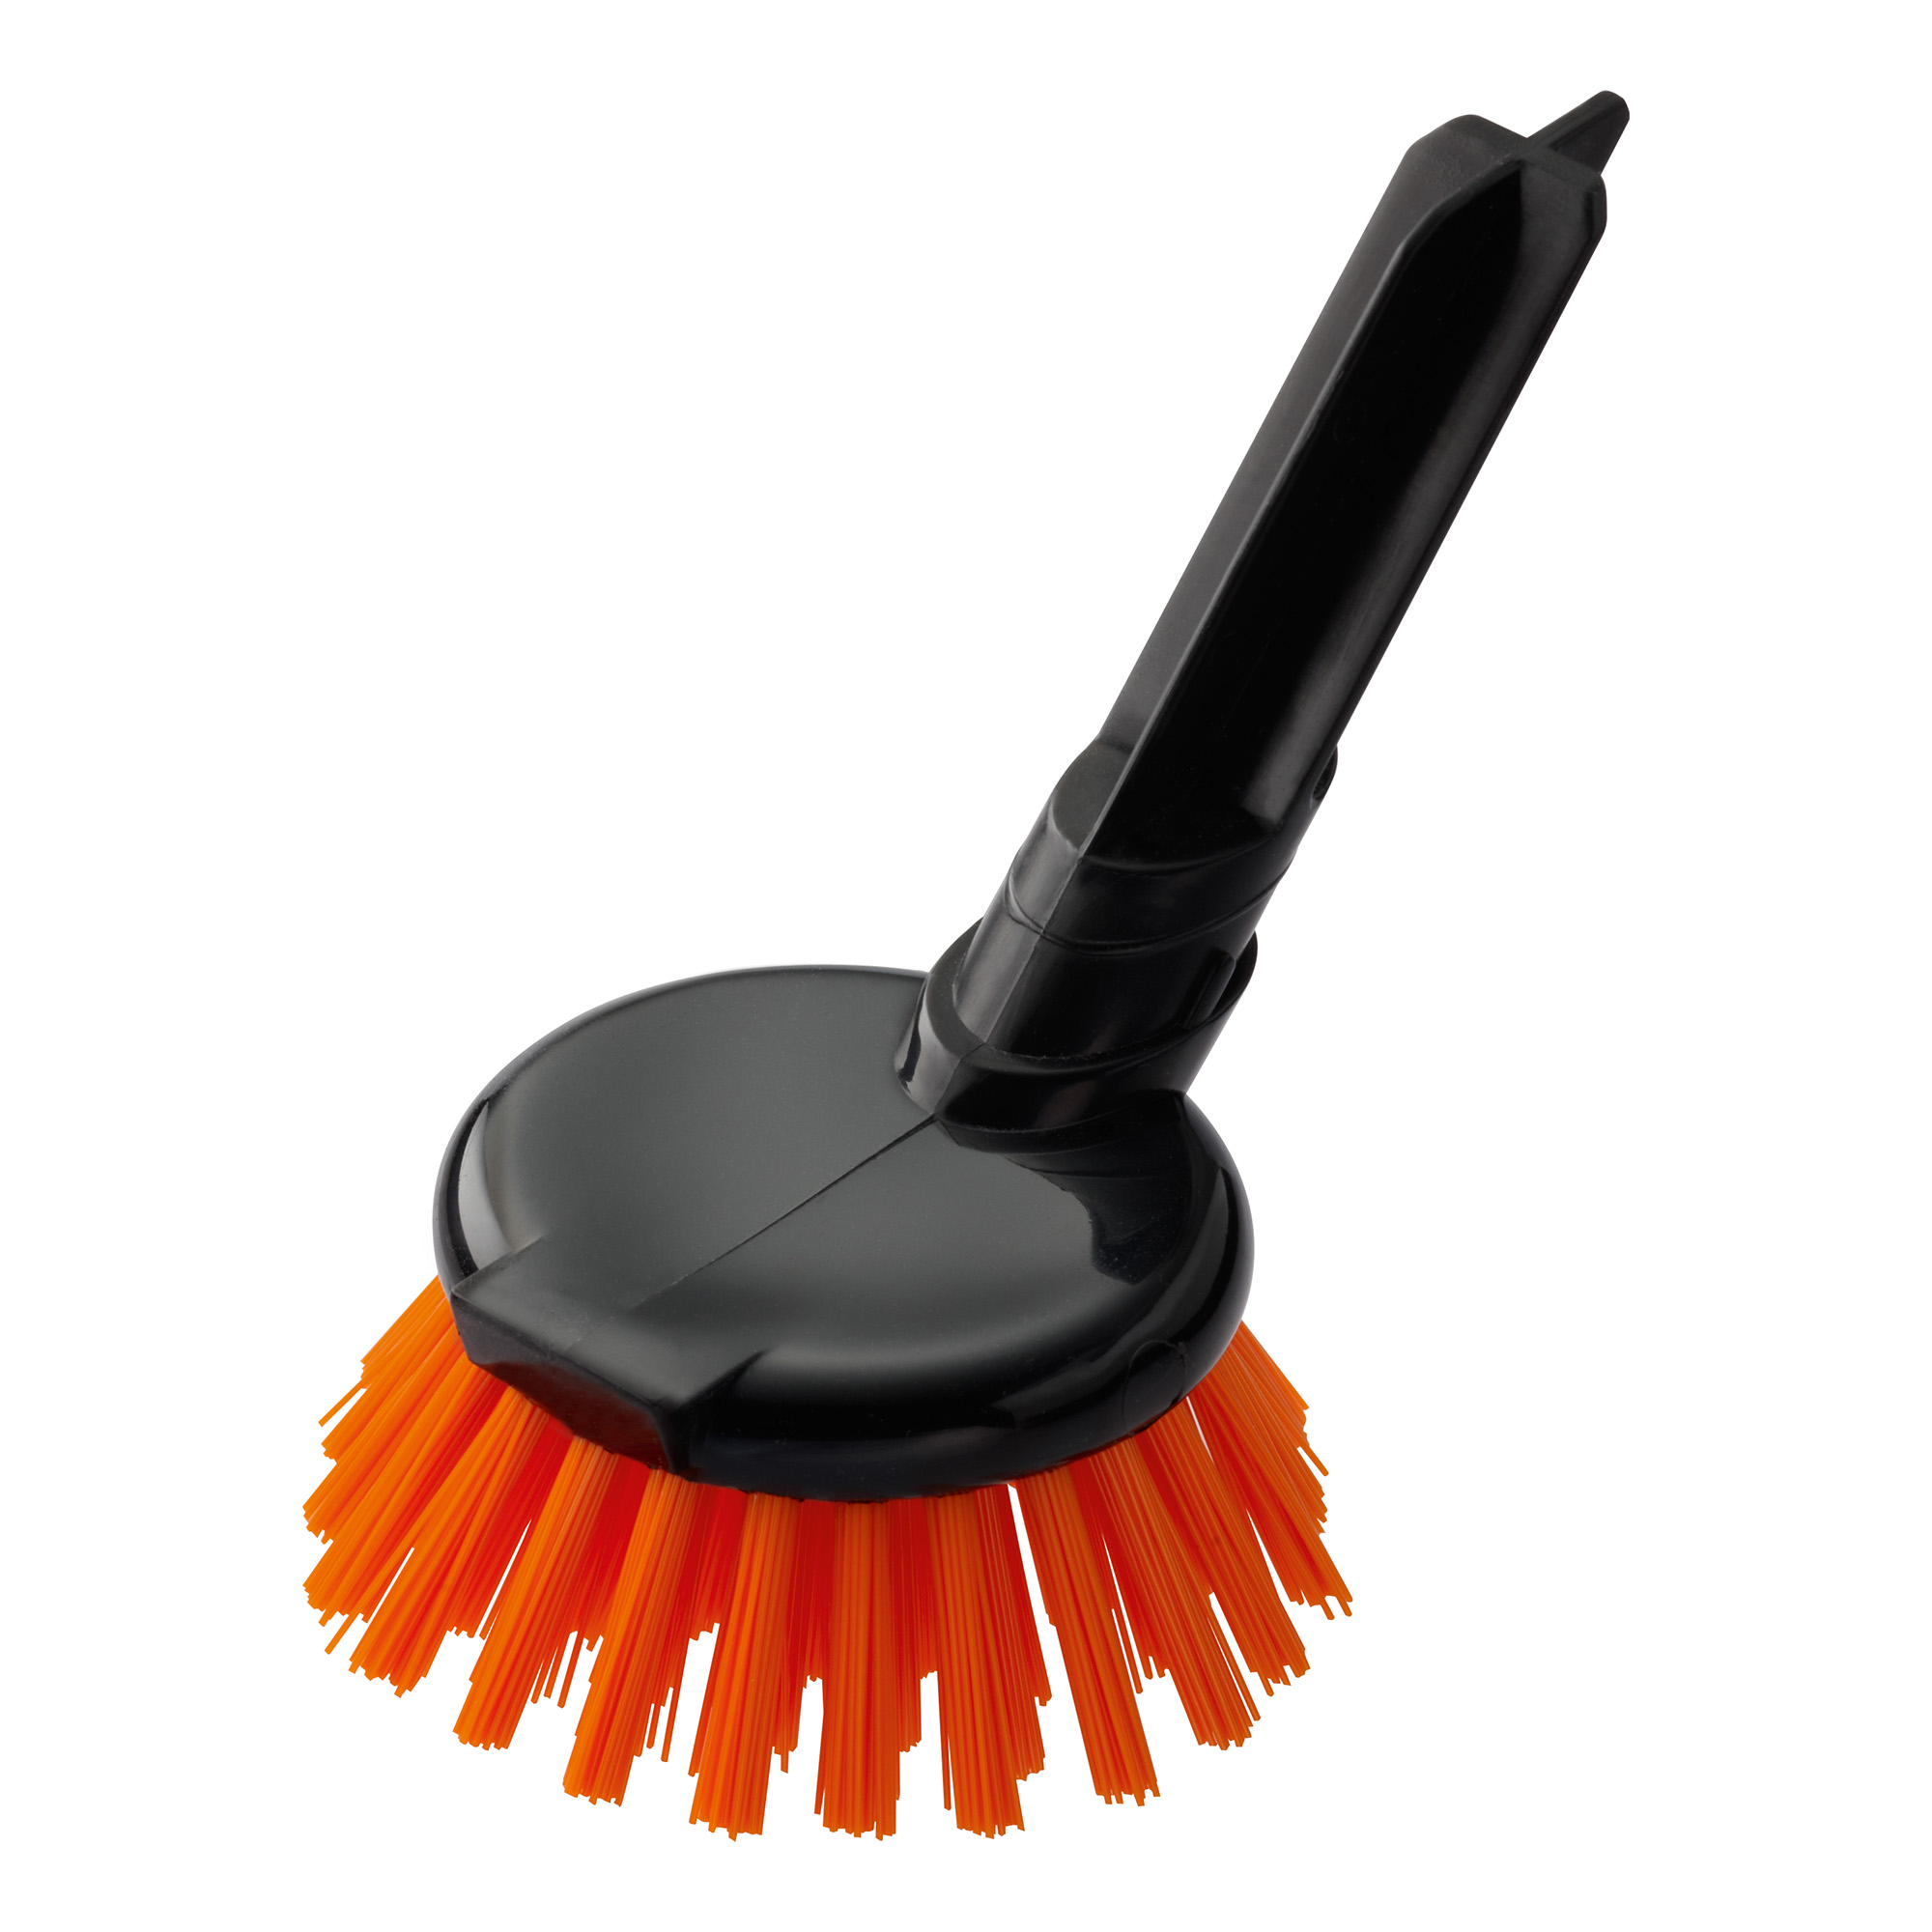 Replacement Head for Washing-up Brush antibacterial (Item no. 12808)